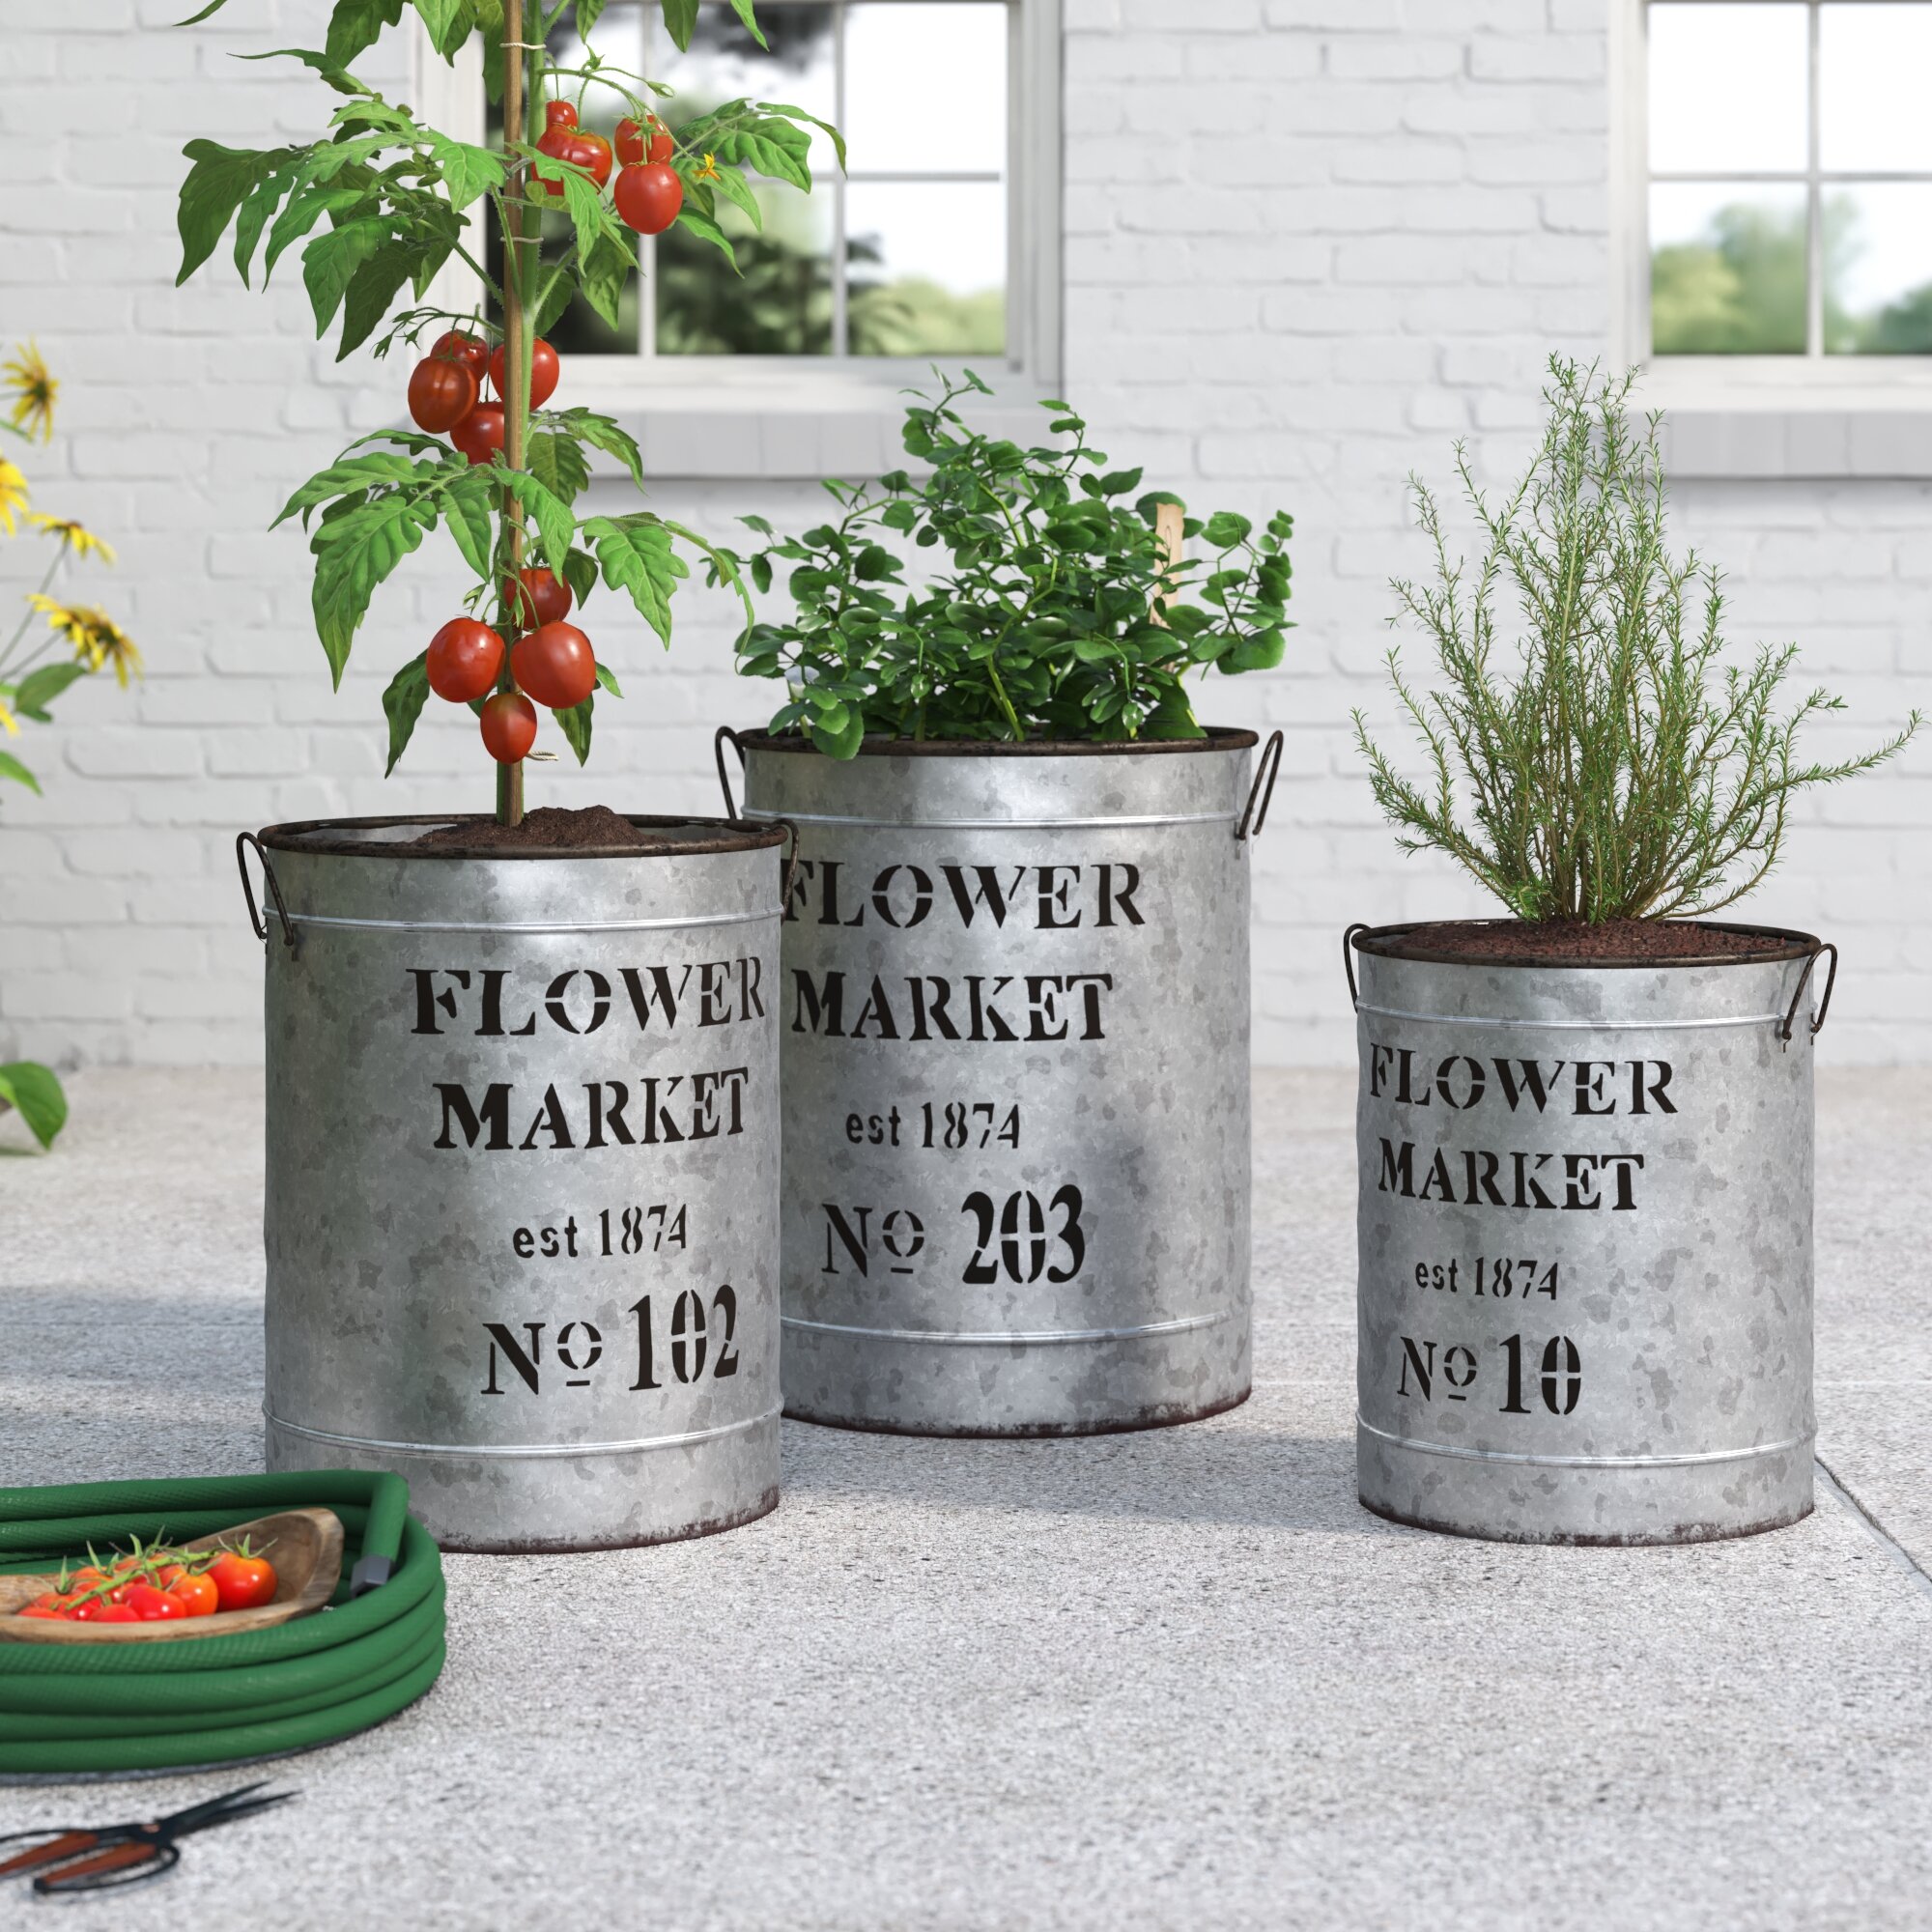 Sego Decorative Round Metal Buckets with Handles and Flower